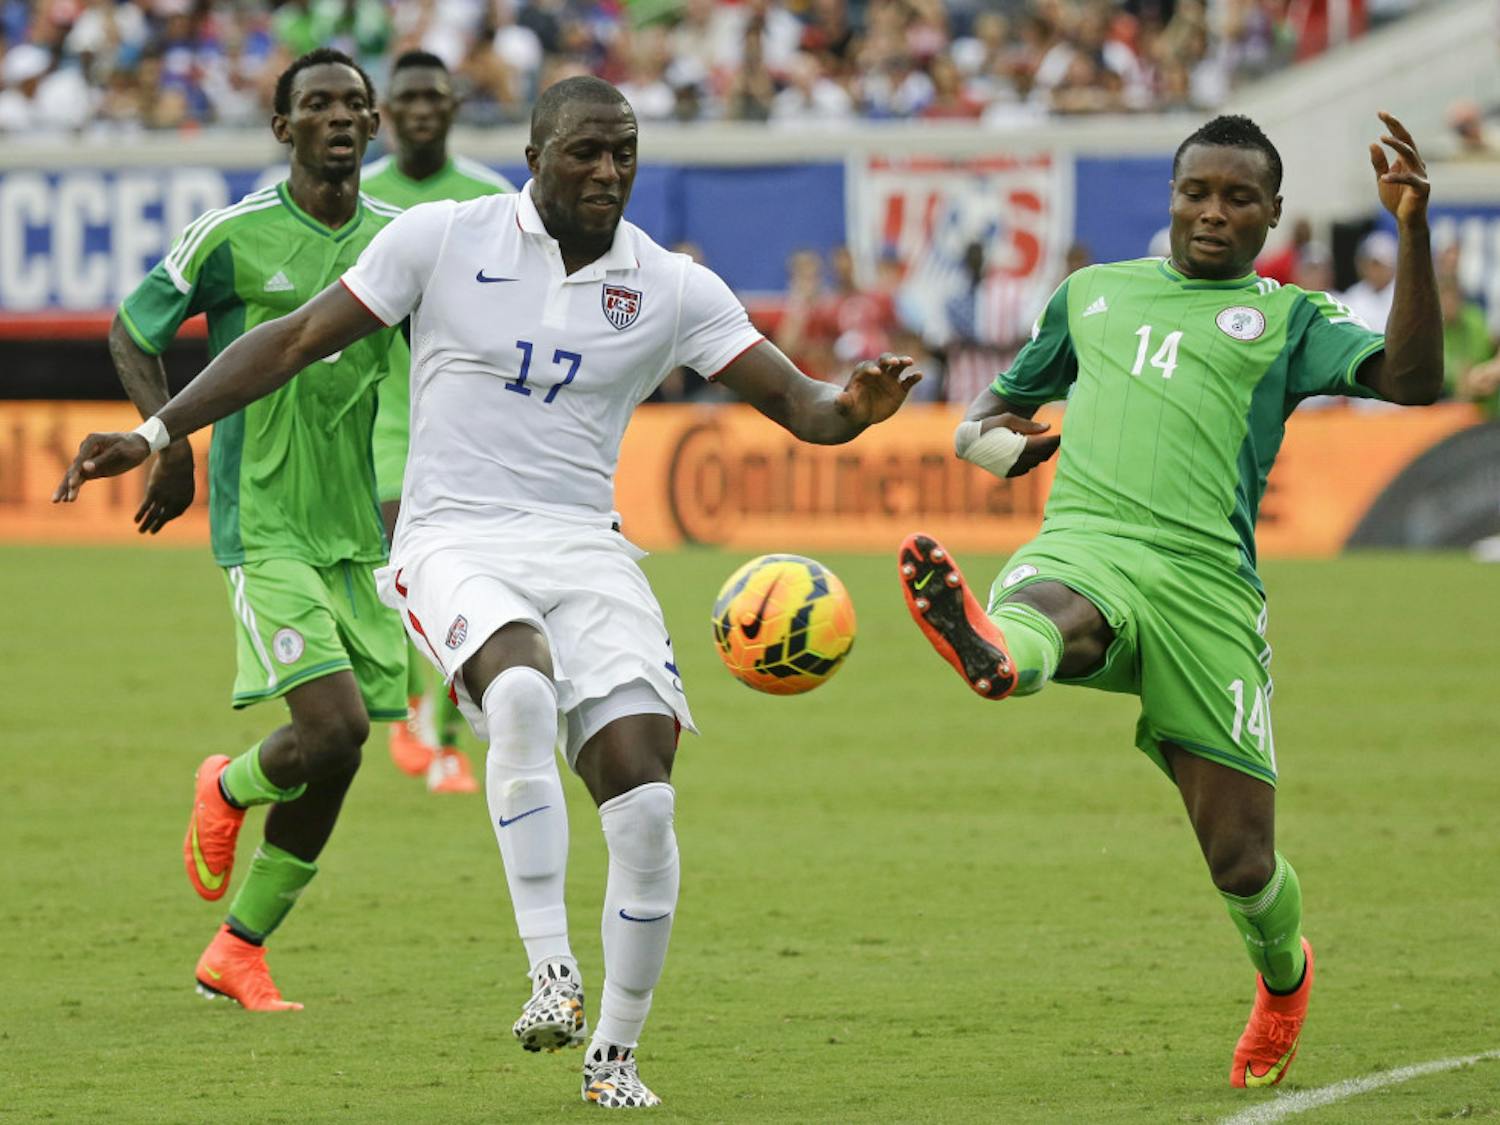 United States' Jozy Altidore (17) and Nigeria's GoDrey Oboabona (14) vie for control of the ball during the second half of an international friendly soccer match on Saturday in Jacksonville, Fla. The United States won 2-1.